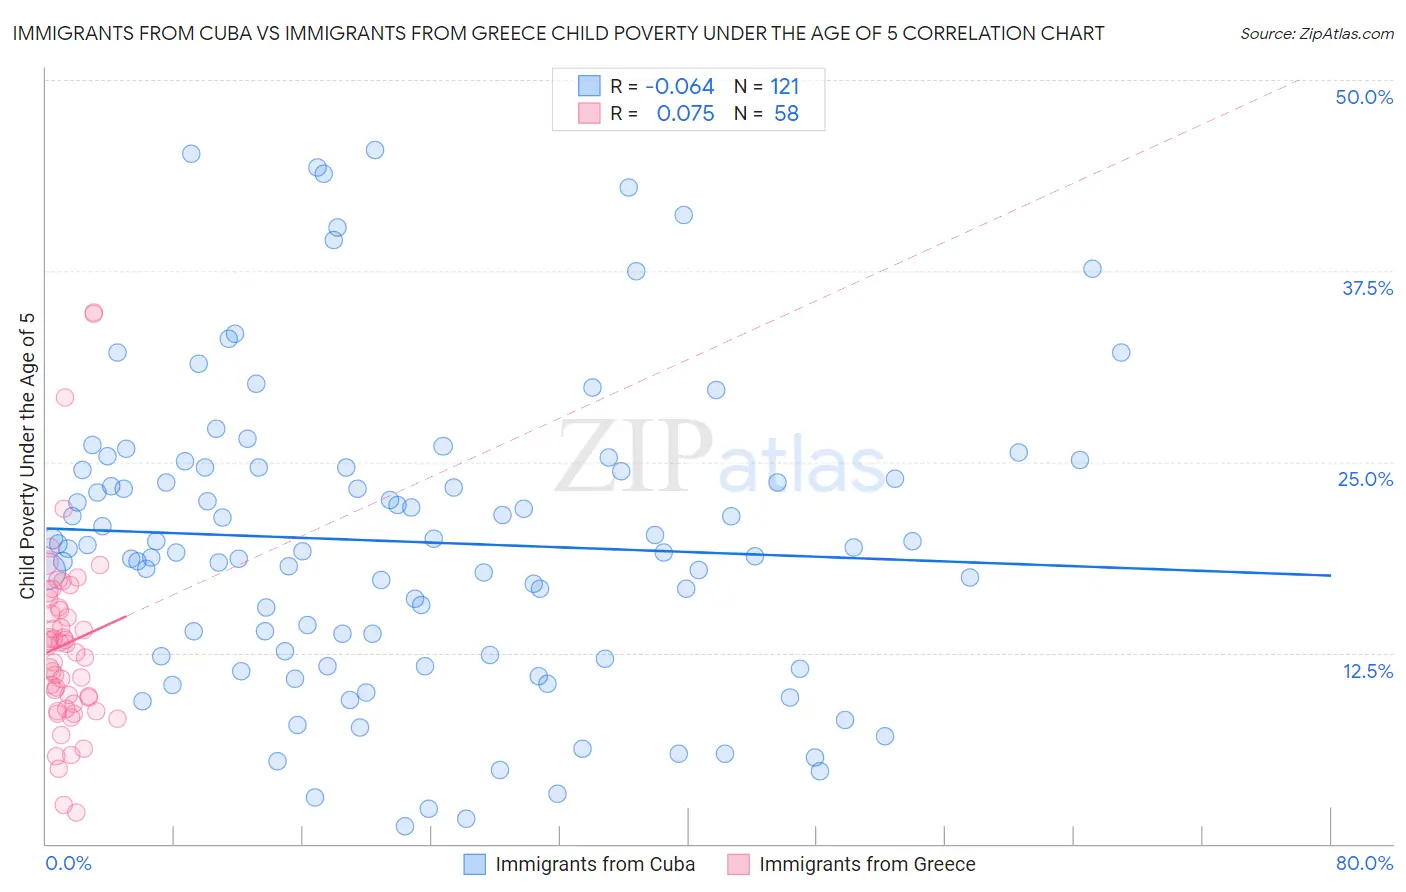 Immigrants from Cuba vs Immigrants from Greece Child Poverty Under the Age of 5